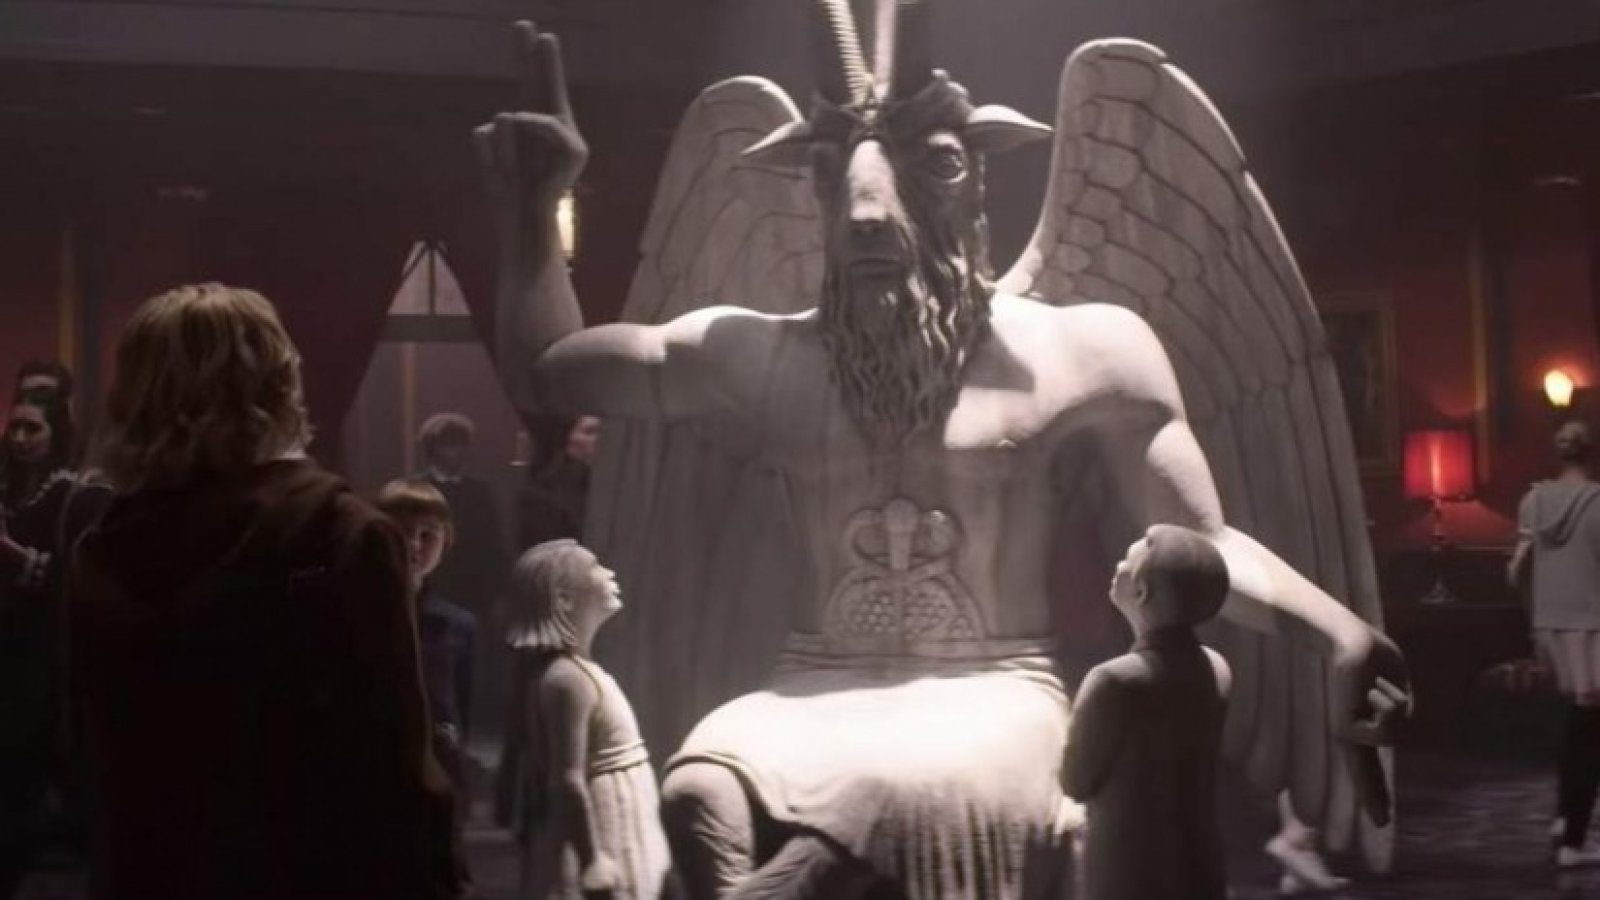 The Satanic Temple is suing Netflix over ‘The Chilling Adventures of Sabrina’